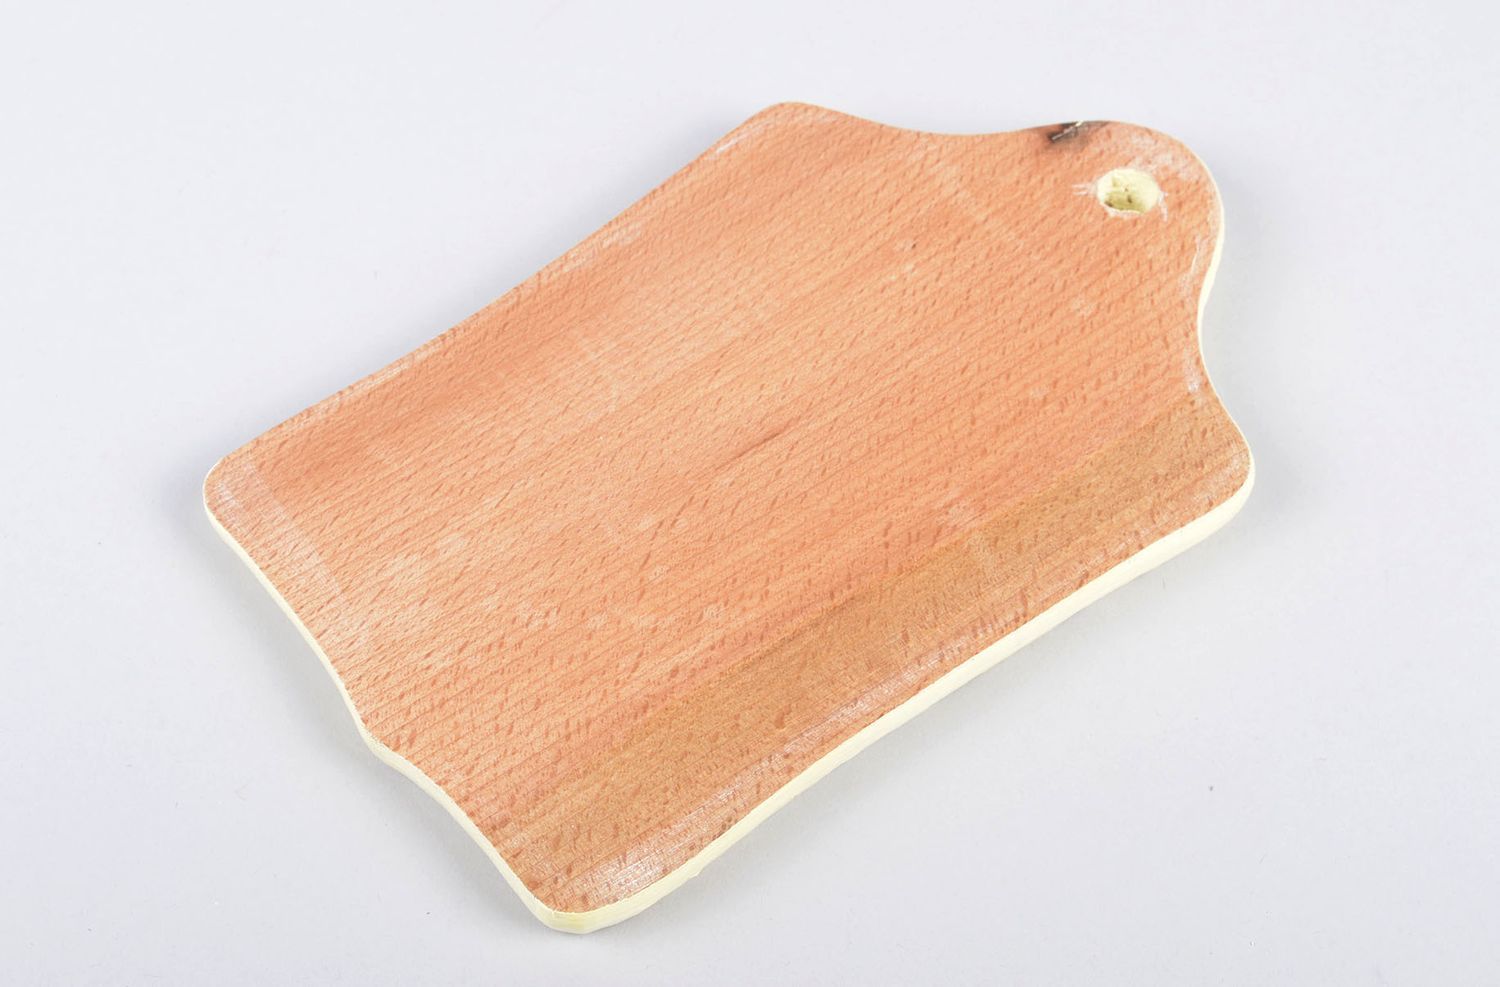 Handmade wooden cutting board chopping board for decorative use only cool gifts photo 2